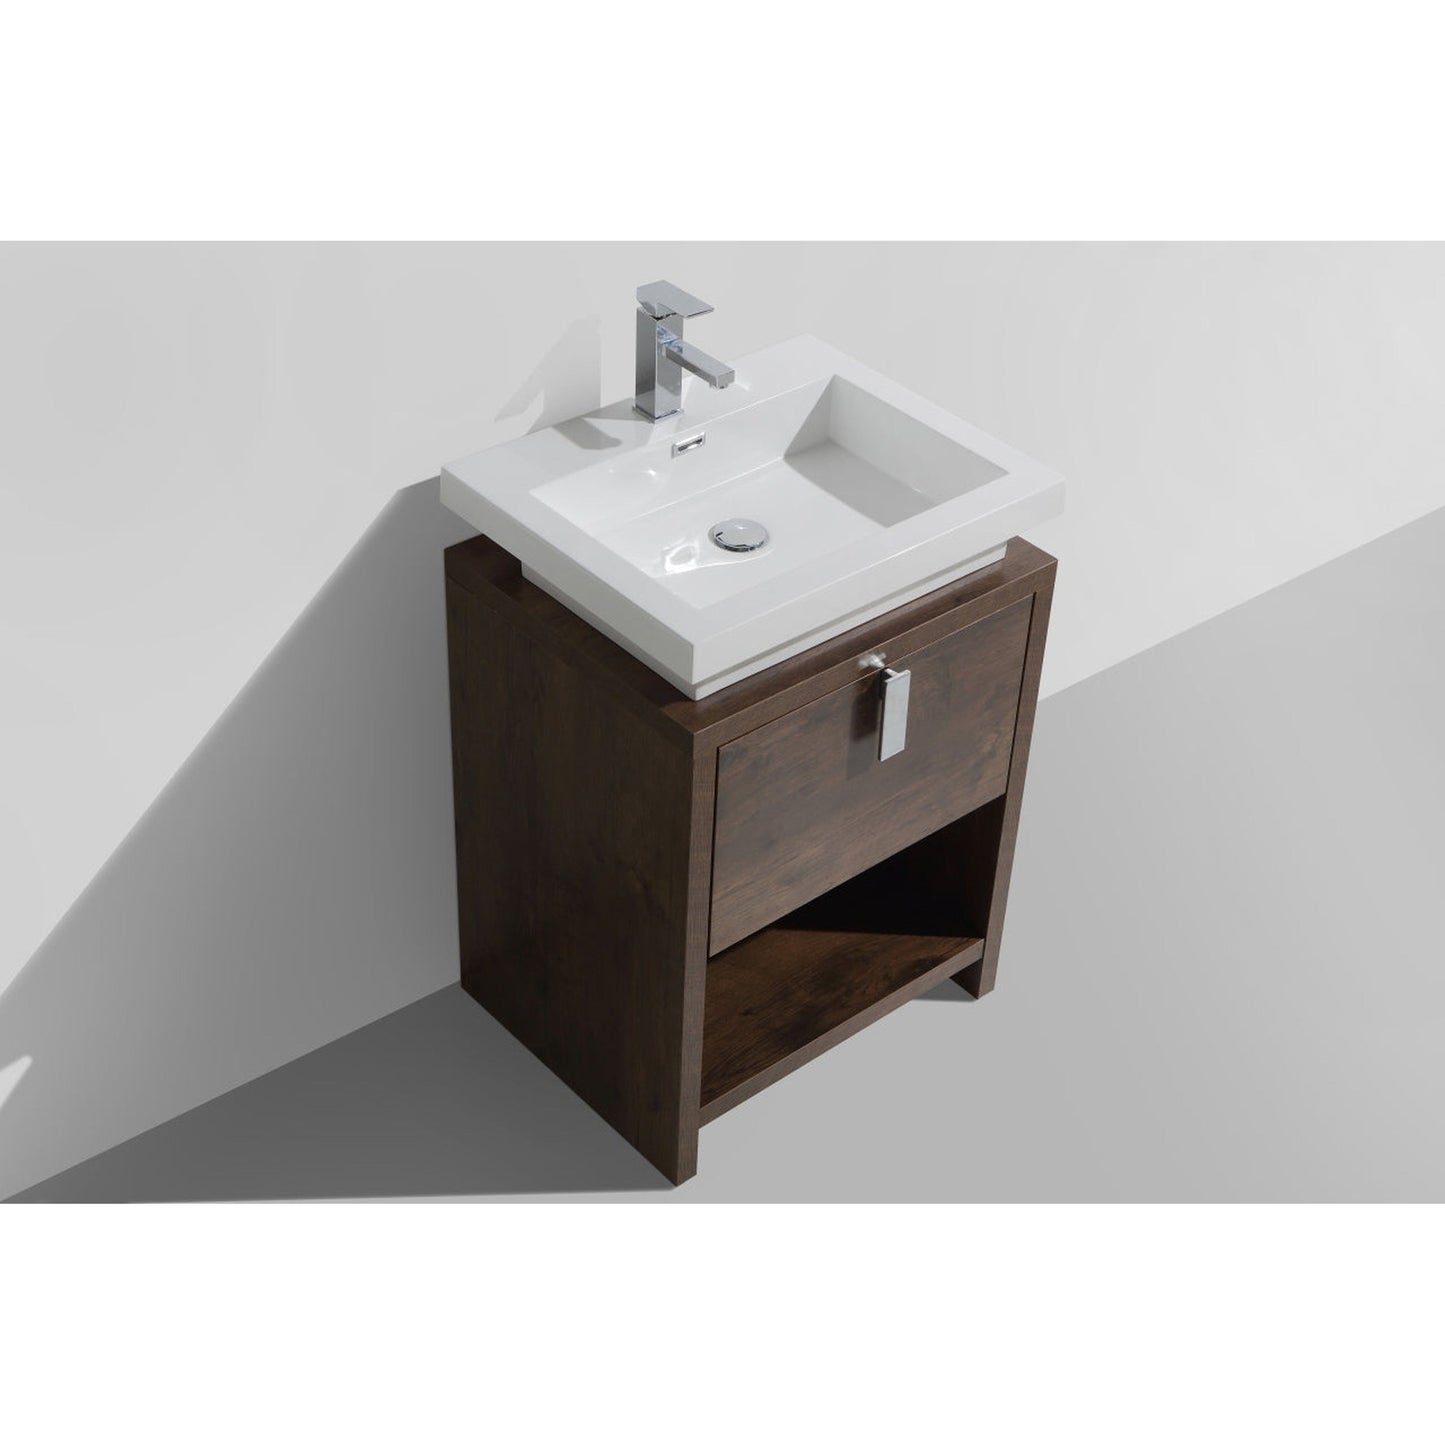 KubeBath Levi 24" Rose Wood Freestanding Bathroom Vanity With Cubby Hole & Reinforced Acrylic Composite Sink With Rectangular Chrome Overflow